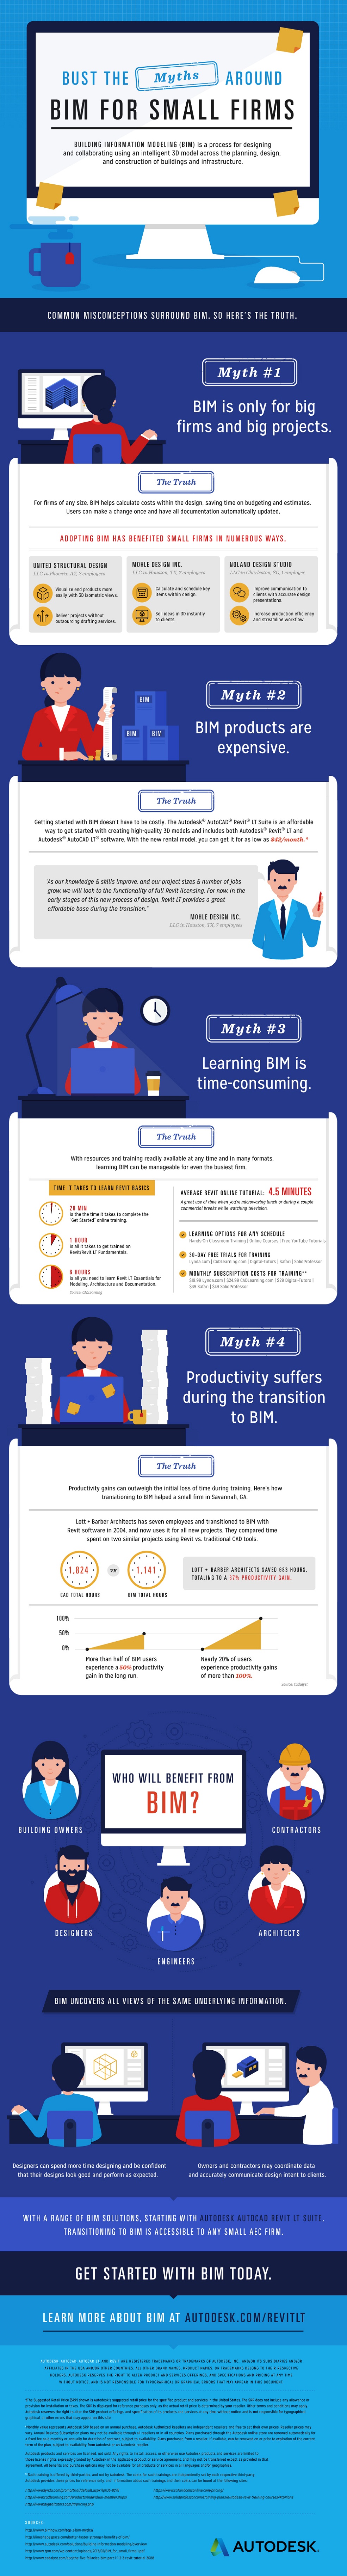 Bust The Myths Around BIM For Small Firms